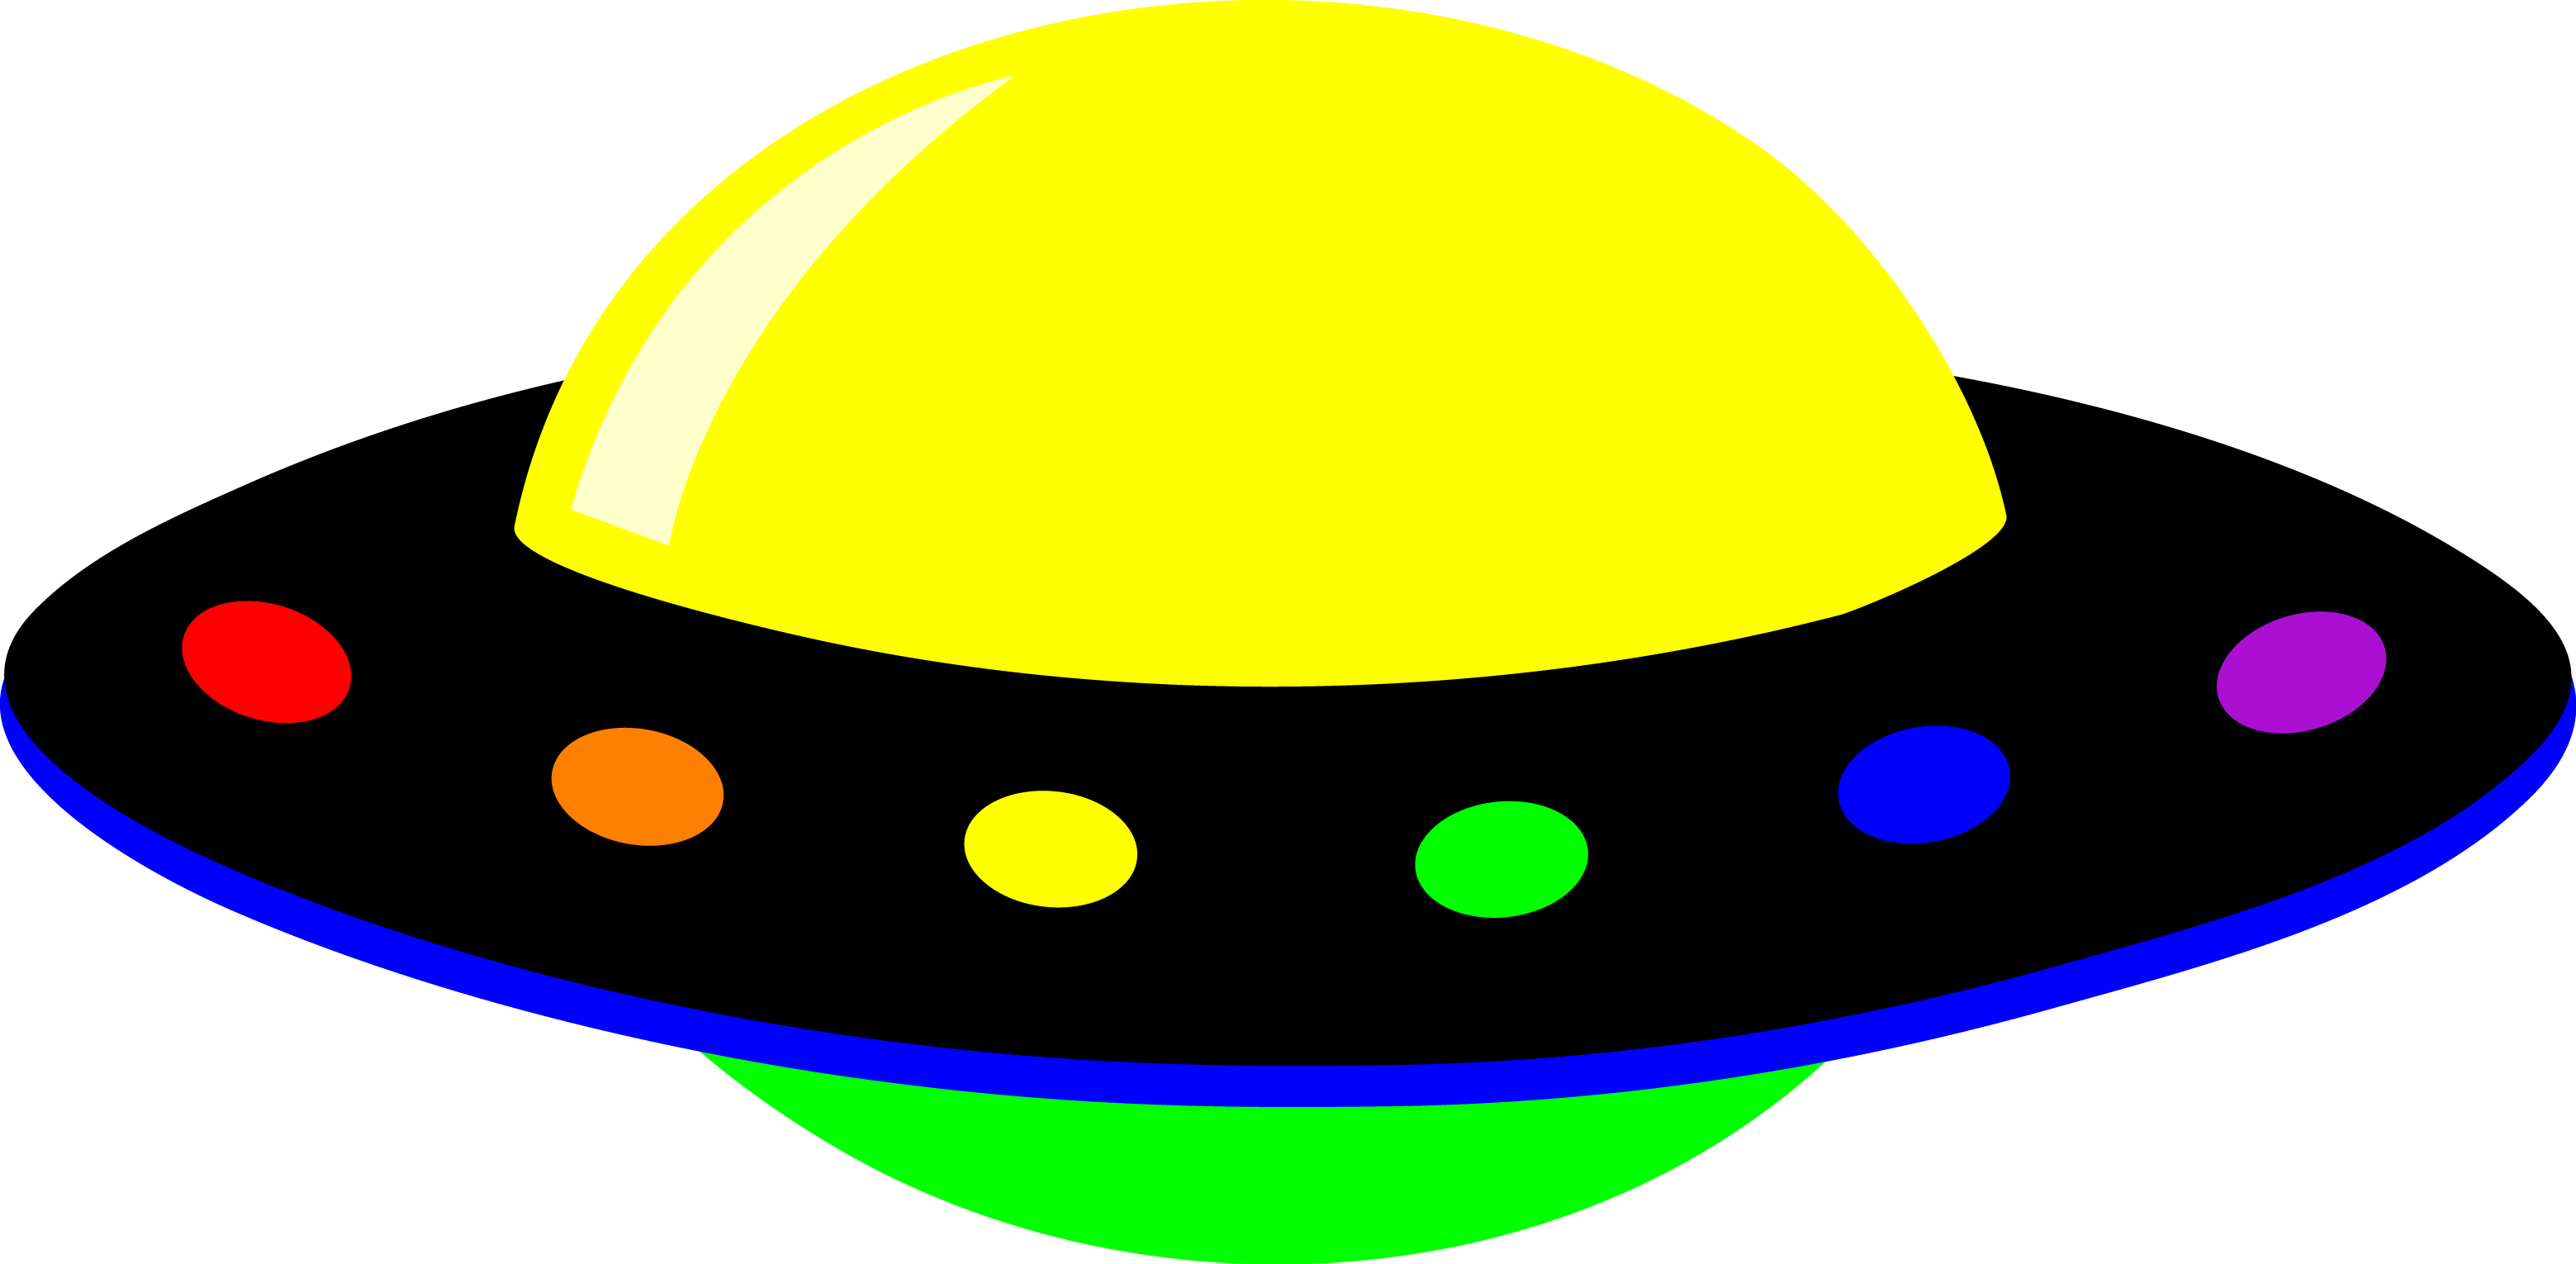 Cartoon Alien Ufo | Outer Space Pictures